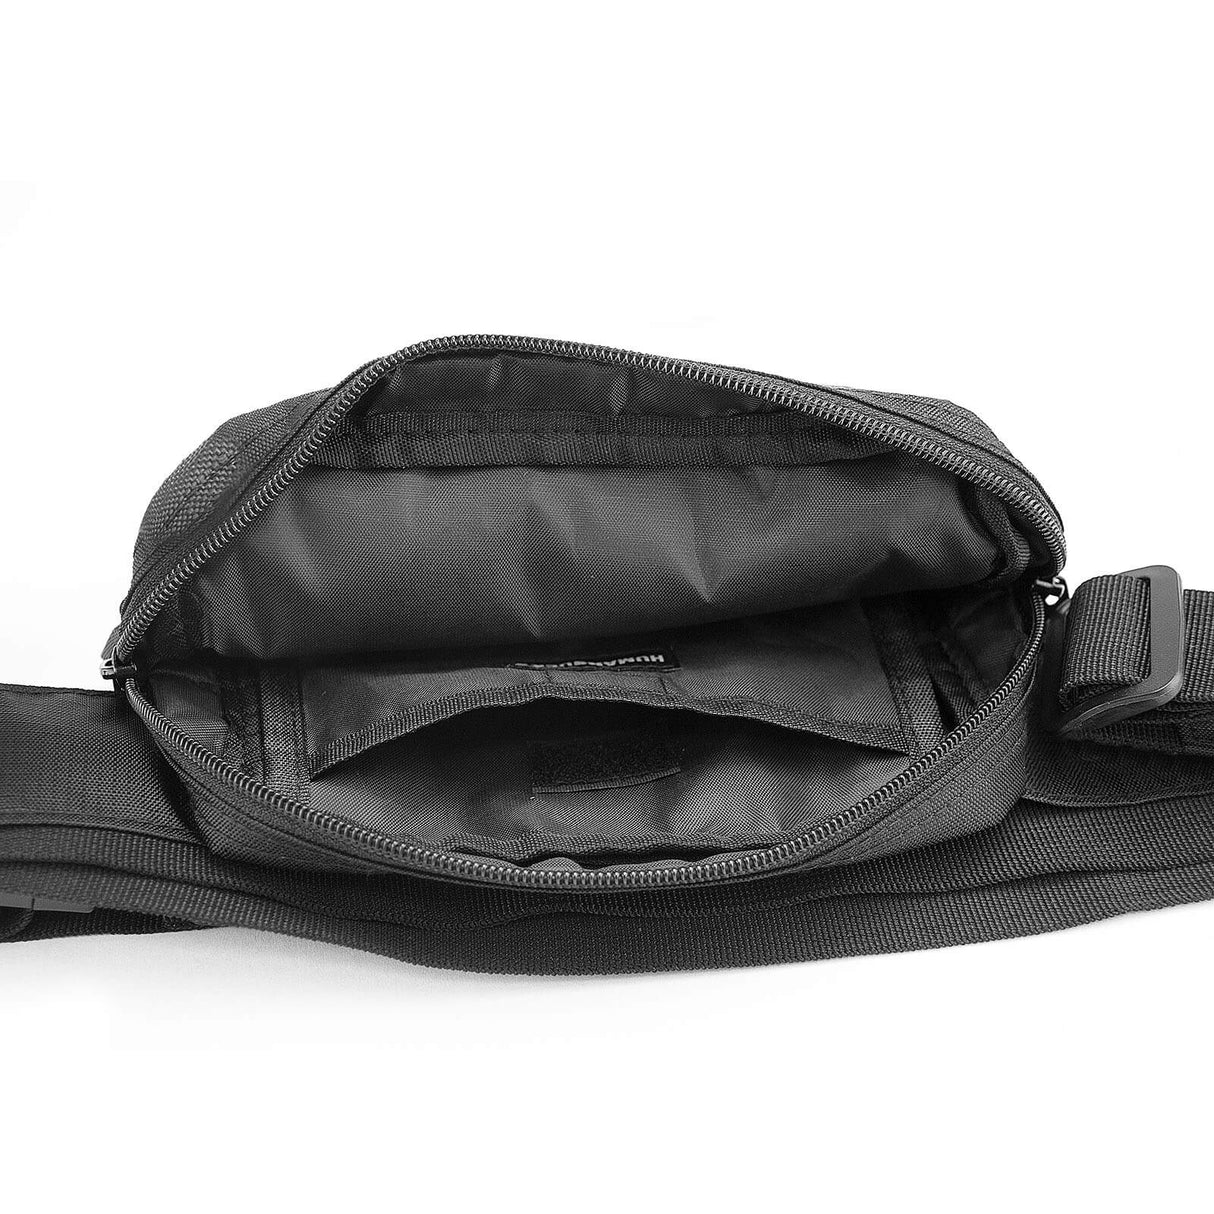 HUMAN SUCKS Fanny Pack open view showing spacious interior and pockets